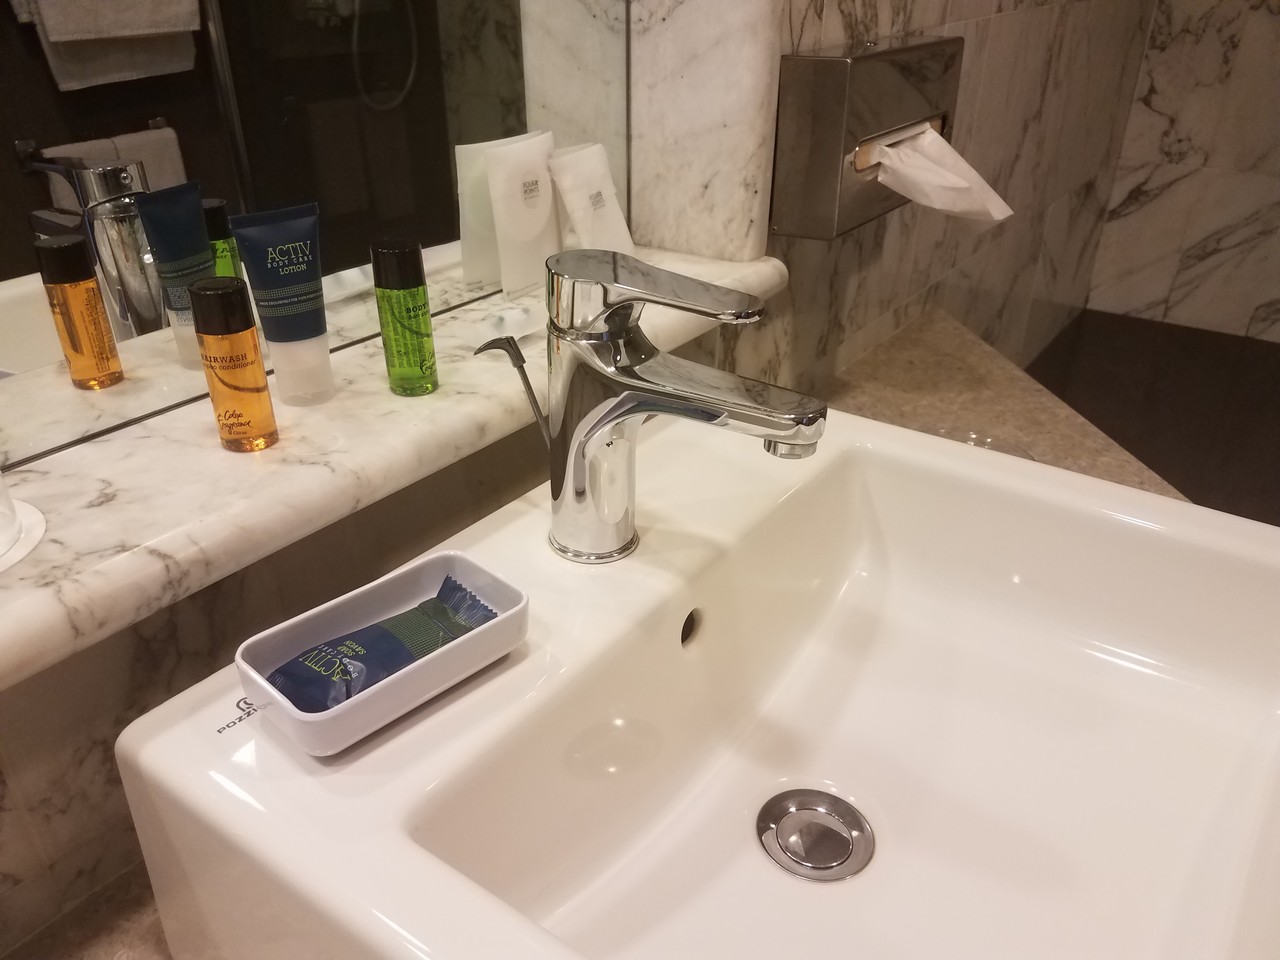 a bathroom sink with a soap dish and a soap dish